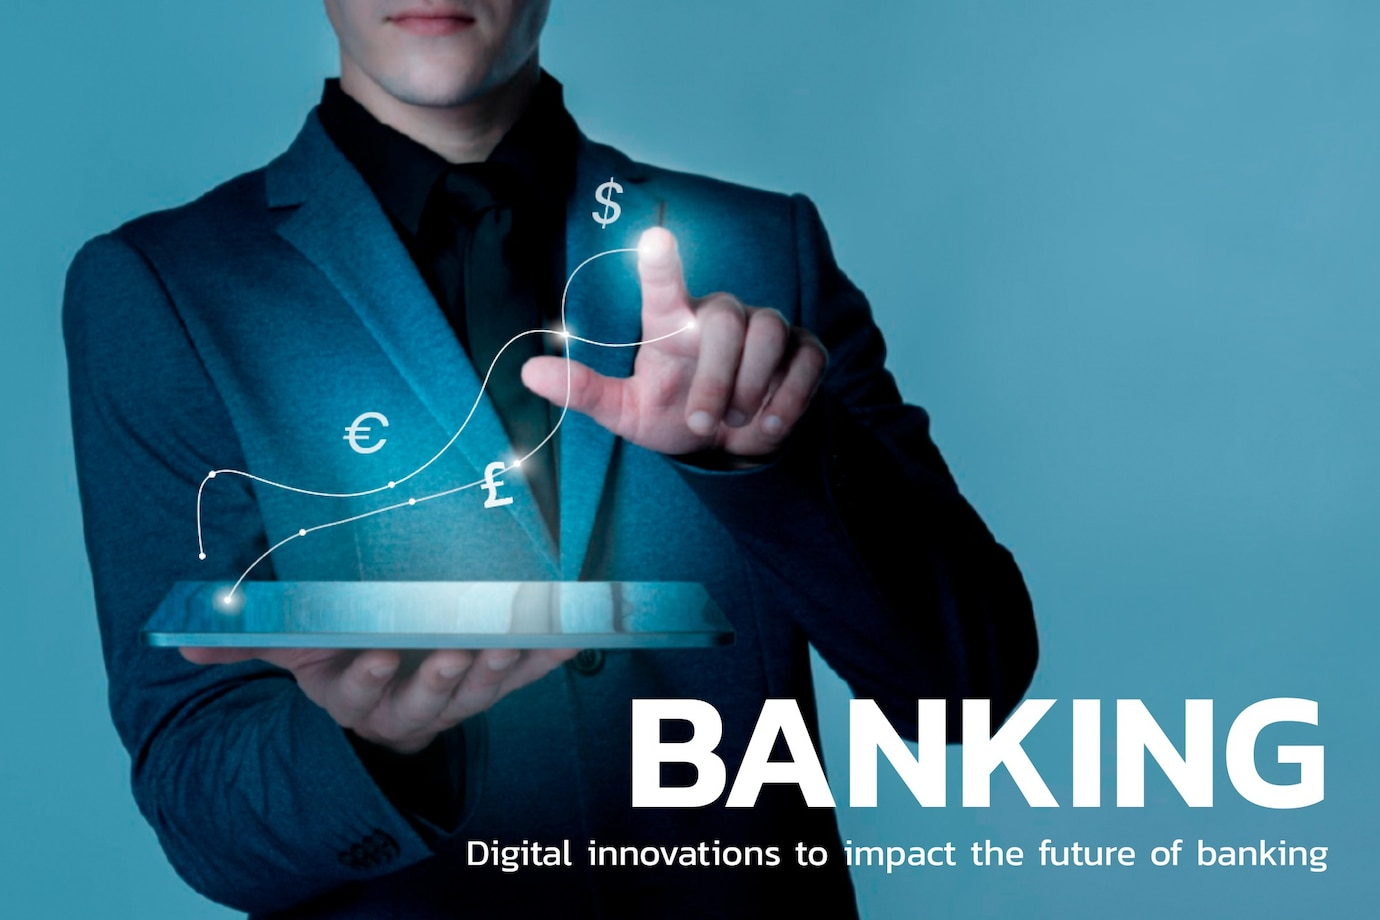 WHICH WILL BE THE RIGHT APPROACH TO CORE BANKING TRANSFORMATION